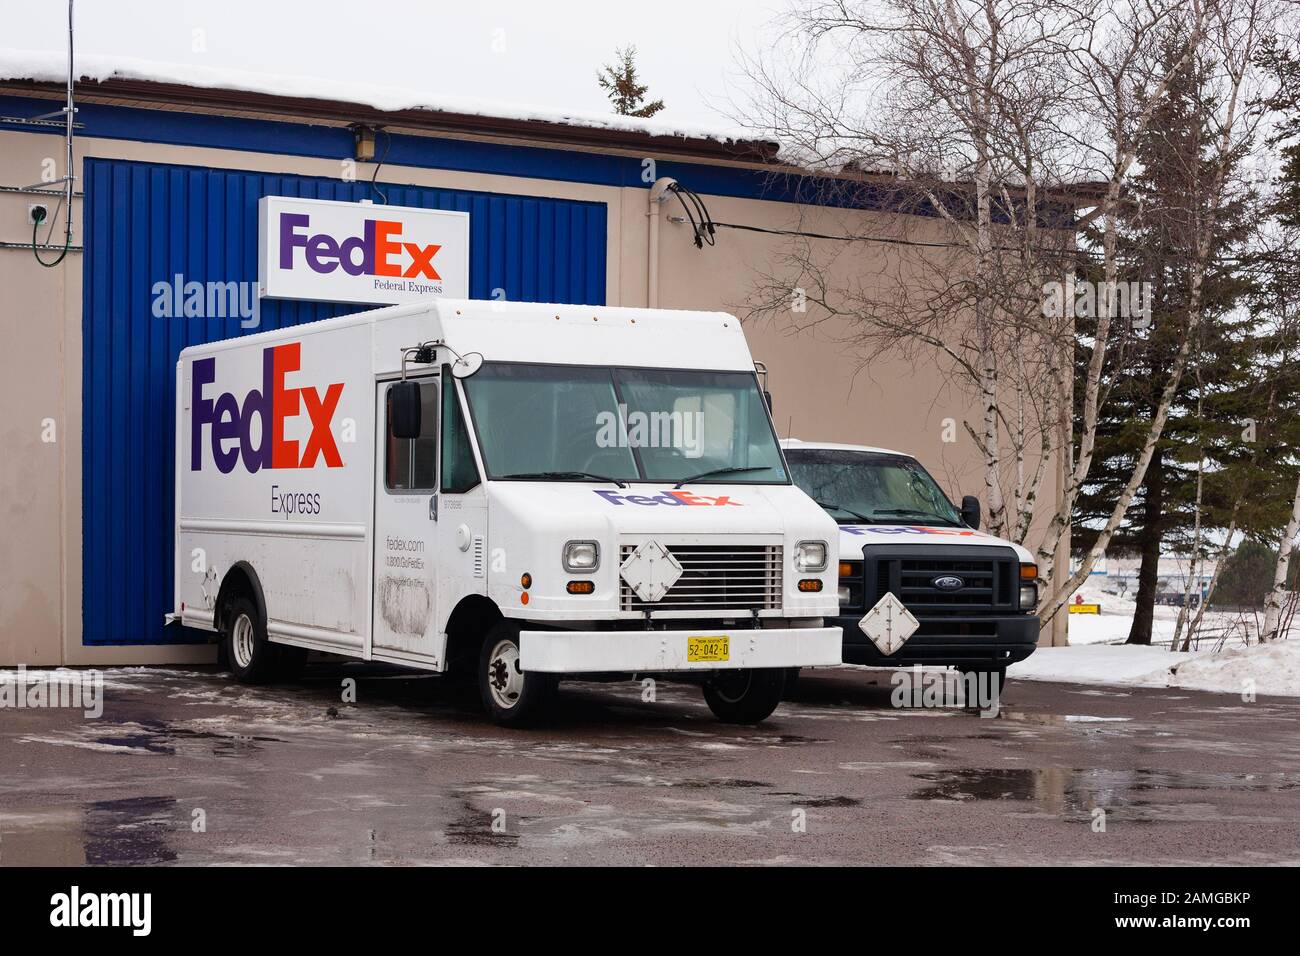 Truro, Canada - January 11, 2020: Parked FedEx delivery truck. FedEx Corporation is an American courier company based in Memphis, Tennessee and operat Stock Photo